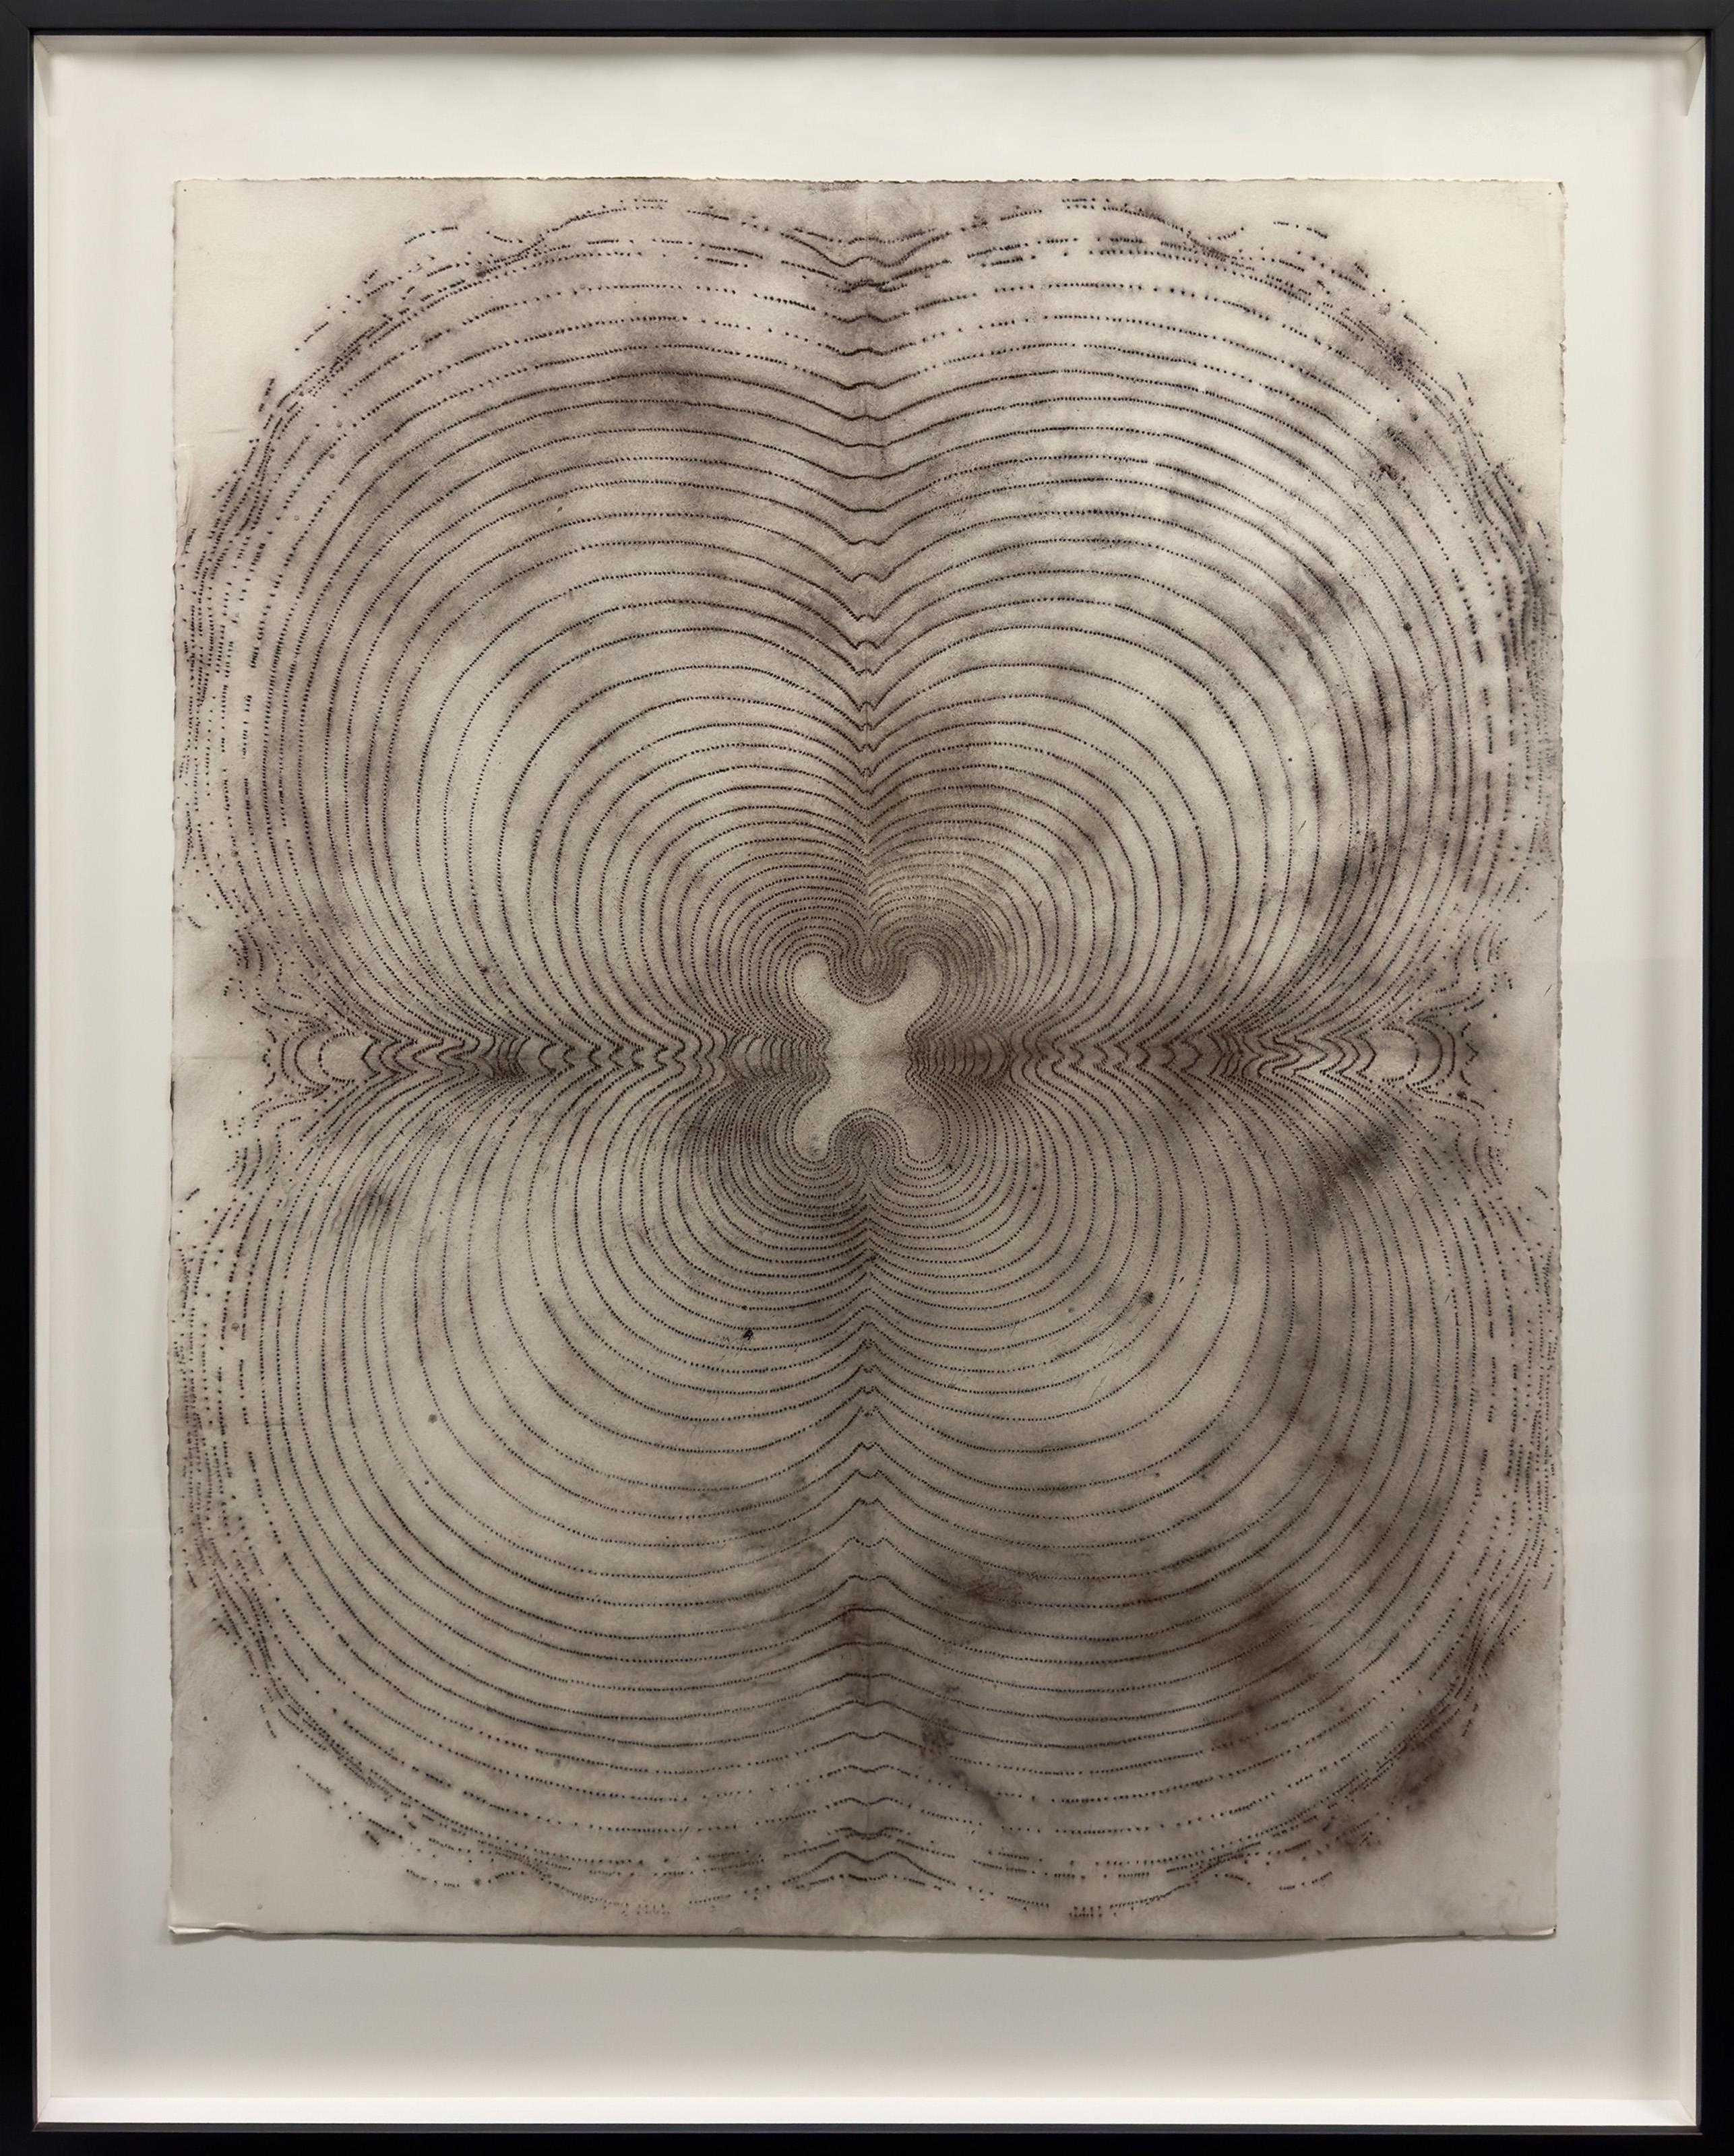 This Op Art piece by Mary Judge artist uses a technique known as stippling to create several concentric rings made of tiny individual dots. The work is part of her “Concentric Shape Series” and is signed and dated on the verso.

Untitled
Mary Judge,